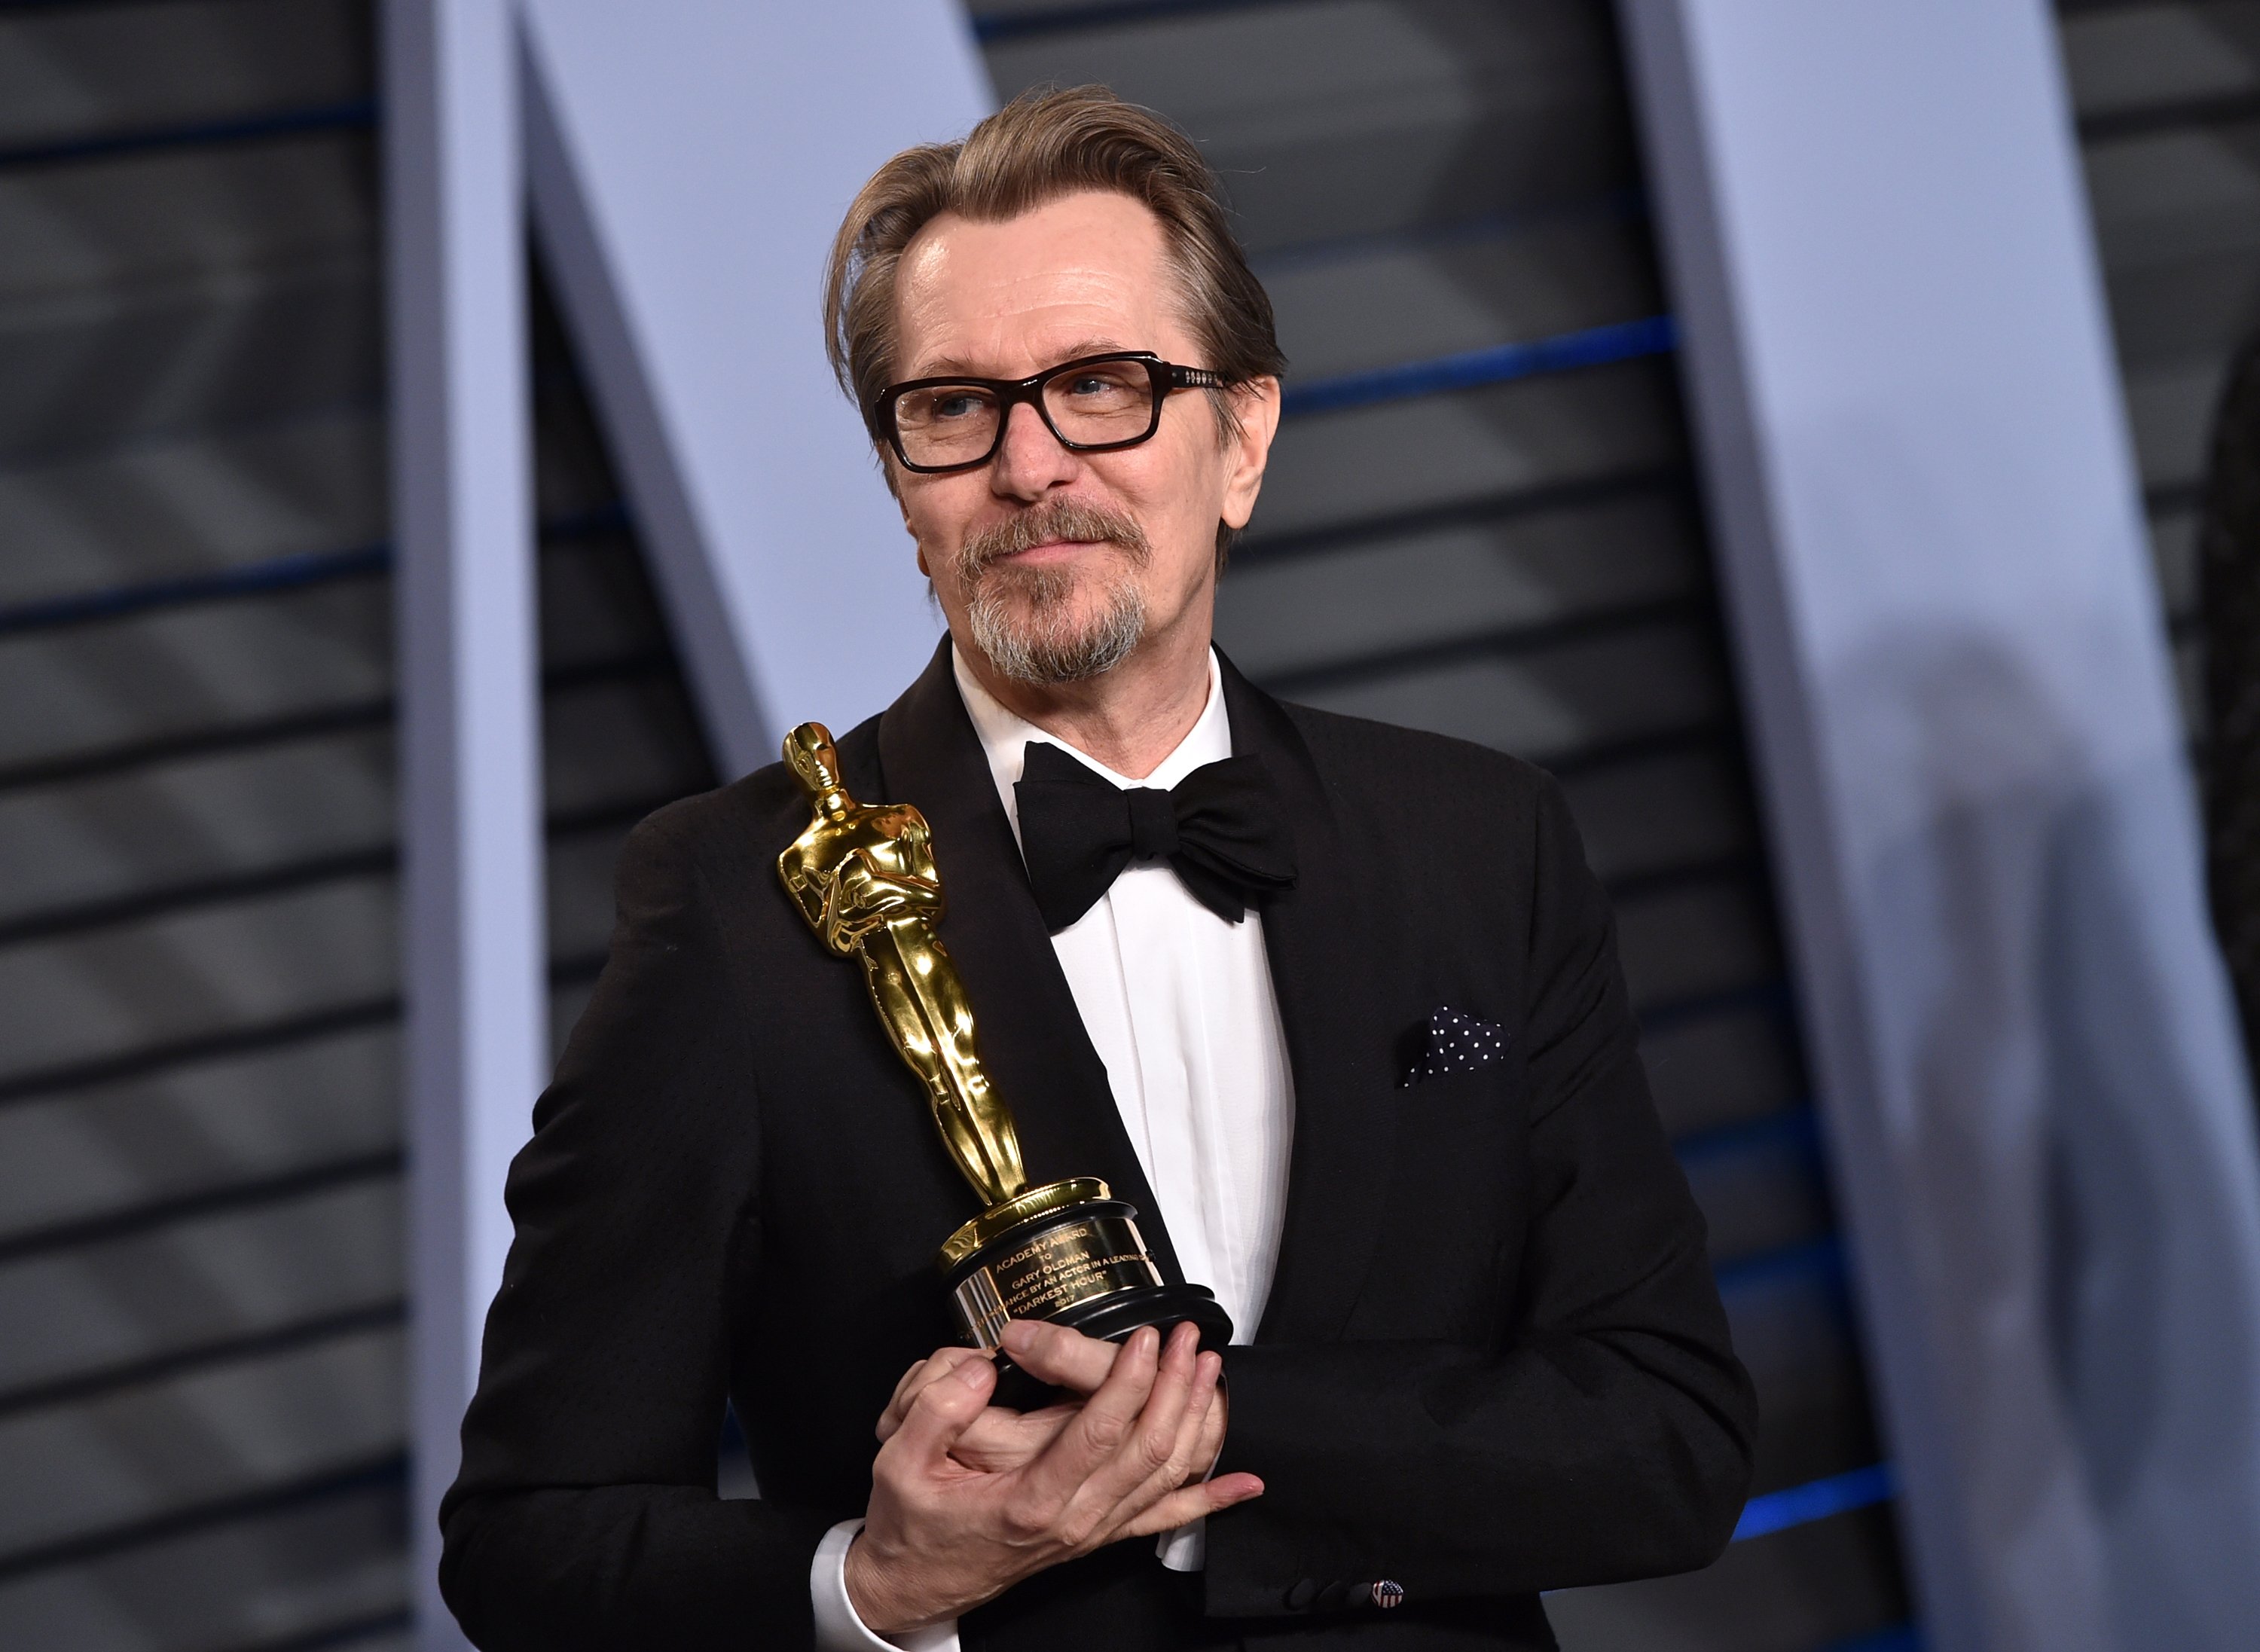 Gary Oldman Image Source: Getty Images.